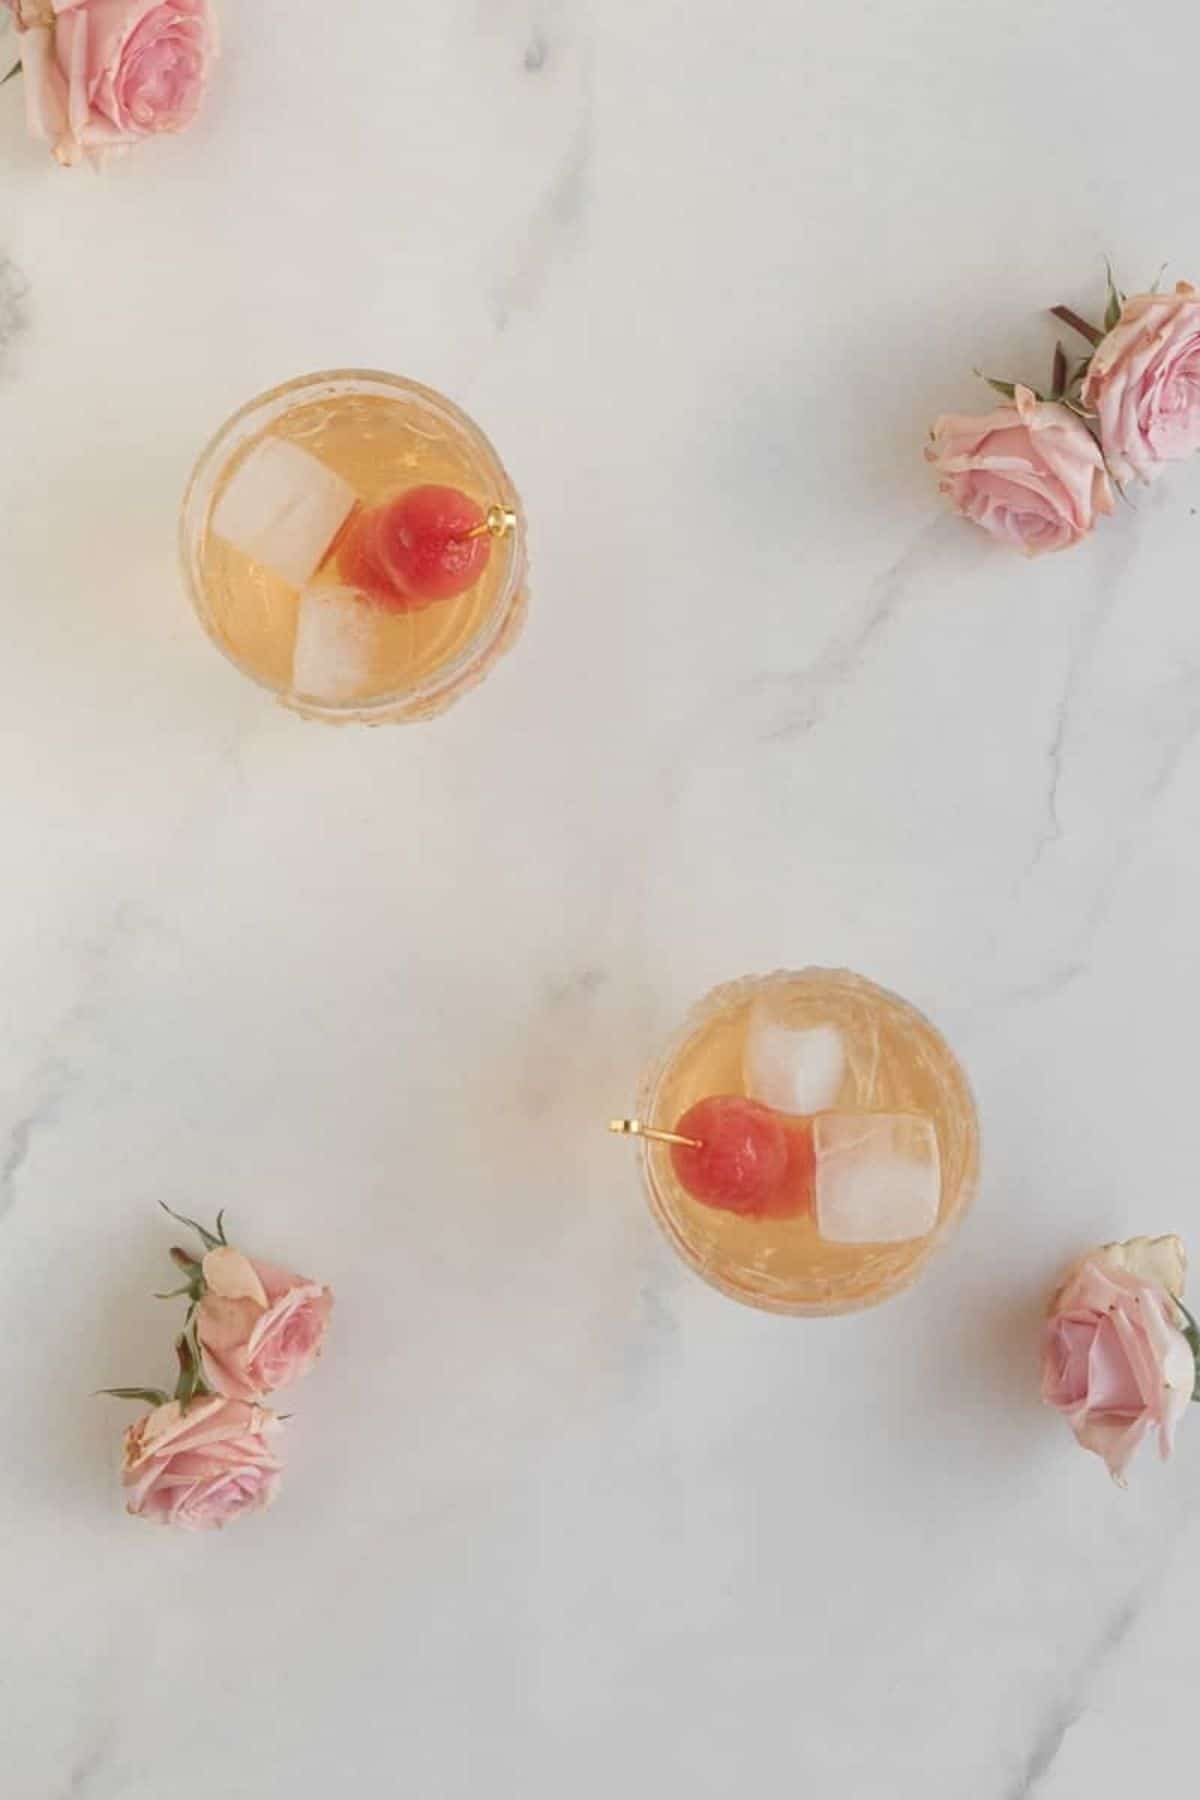 cocktails, roses, and watermelon balls